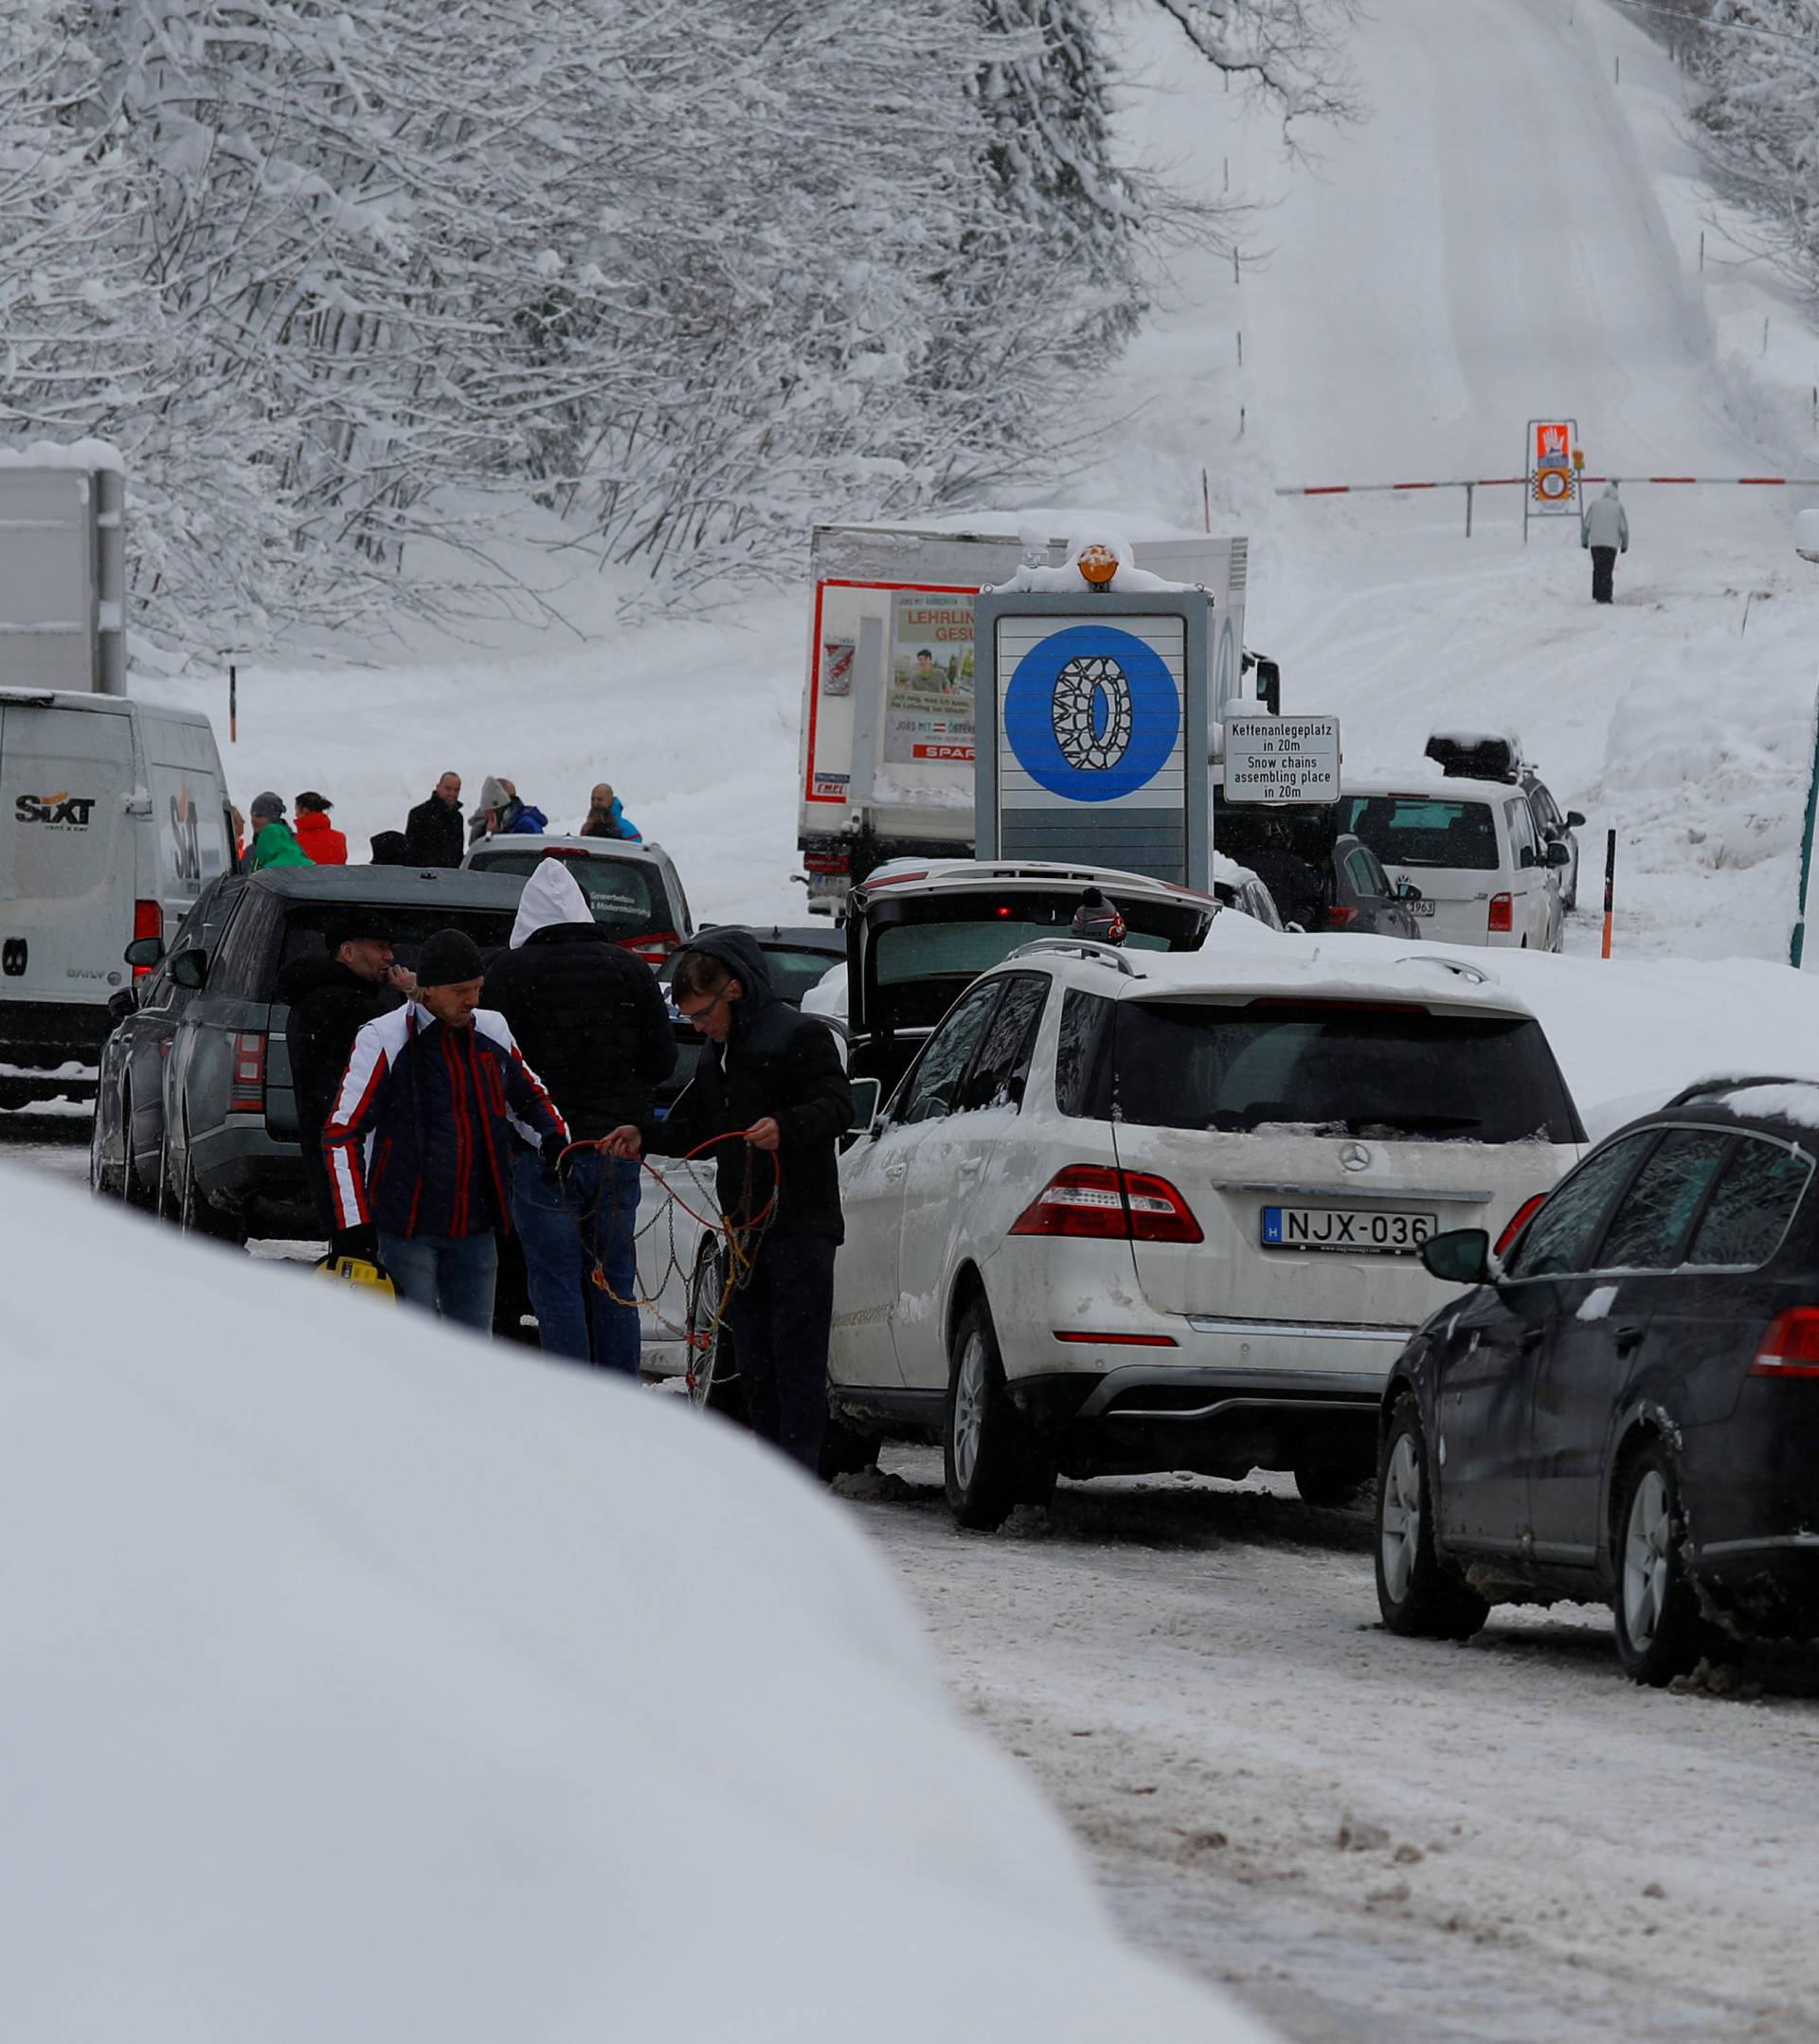 Tourists wait on a closed road after heavy snowfall near Obertauern